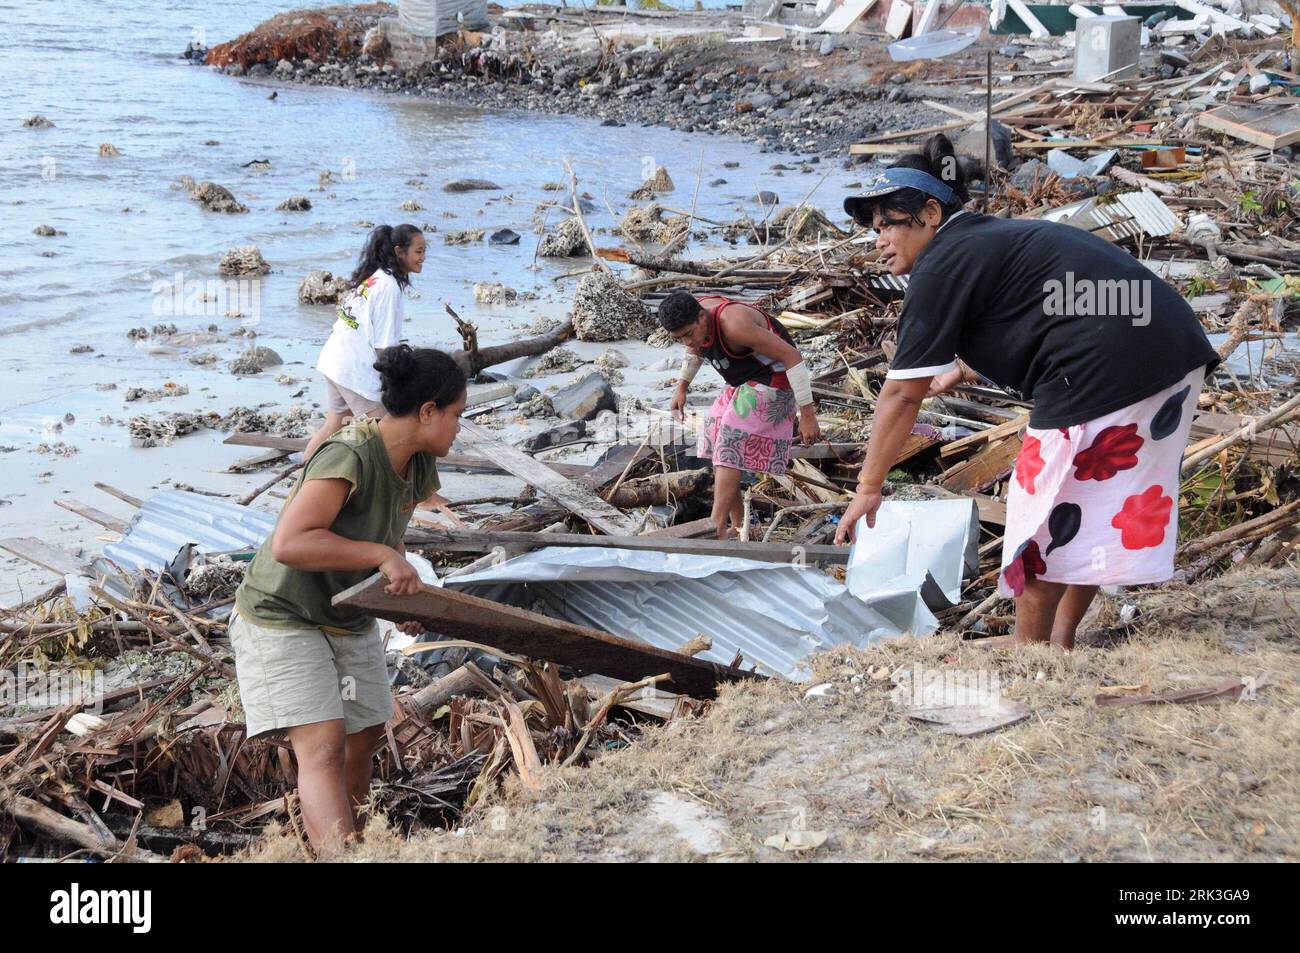 Bildnummer: 53506509  Datum: 03.10.2009  Copyright: imago/Xinhua (091005) -- APIA, Oct. 5, 2009 (Xinhua) -- Victims clean a beach in southeast Upolu Island, Samoa, Oct. 3, 2009. The confirmed combined death toll for the tsunami in Samoa, American Samoa and the northern Isles of Tonga is 176, 135 of them in Samoa. Rescuing work has been fully carried out. (Xinhua/Huang Xingwei) (zhs) (1)SAMOA-EARTHQUAKE-RESCUE PUBLICATIONxNOTxINxCHN Samoa Apia Erdbeben Naturkatastrophen kbdig xub 2009 quer  o0 Opfer, Erdbebenopfer, Aufräumarbeiten    Bildnummer 53506509 Date 03 10 2009 Copyright Imago XINHUA  A Stock Photo